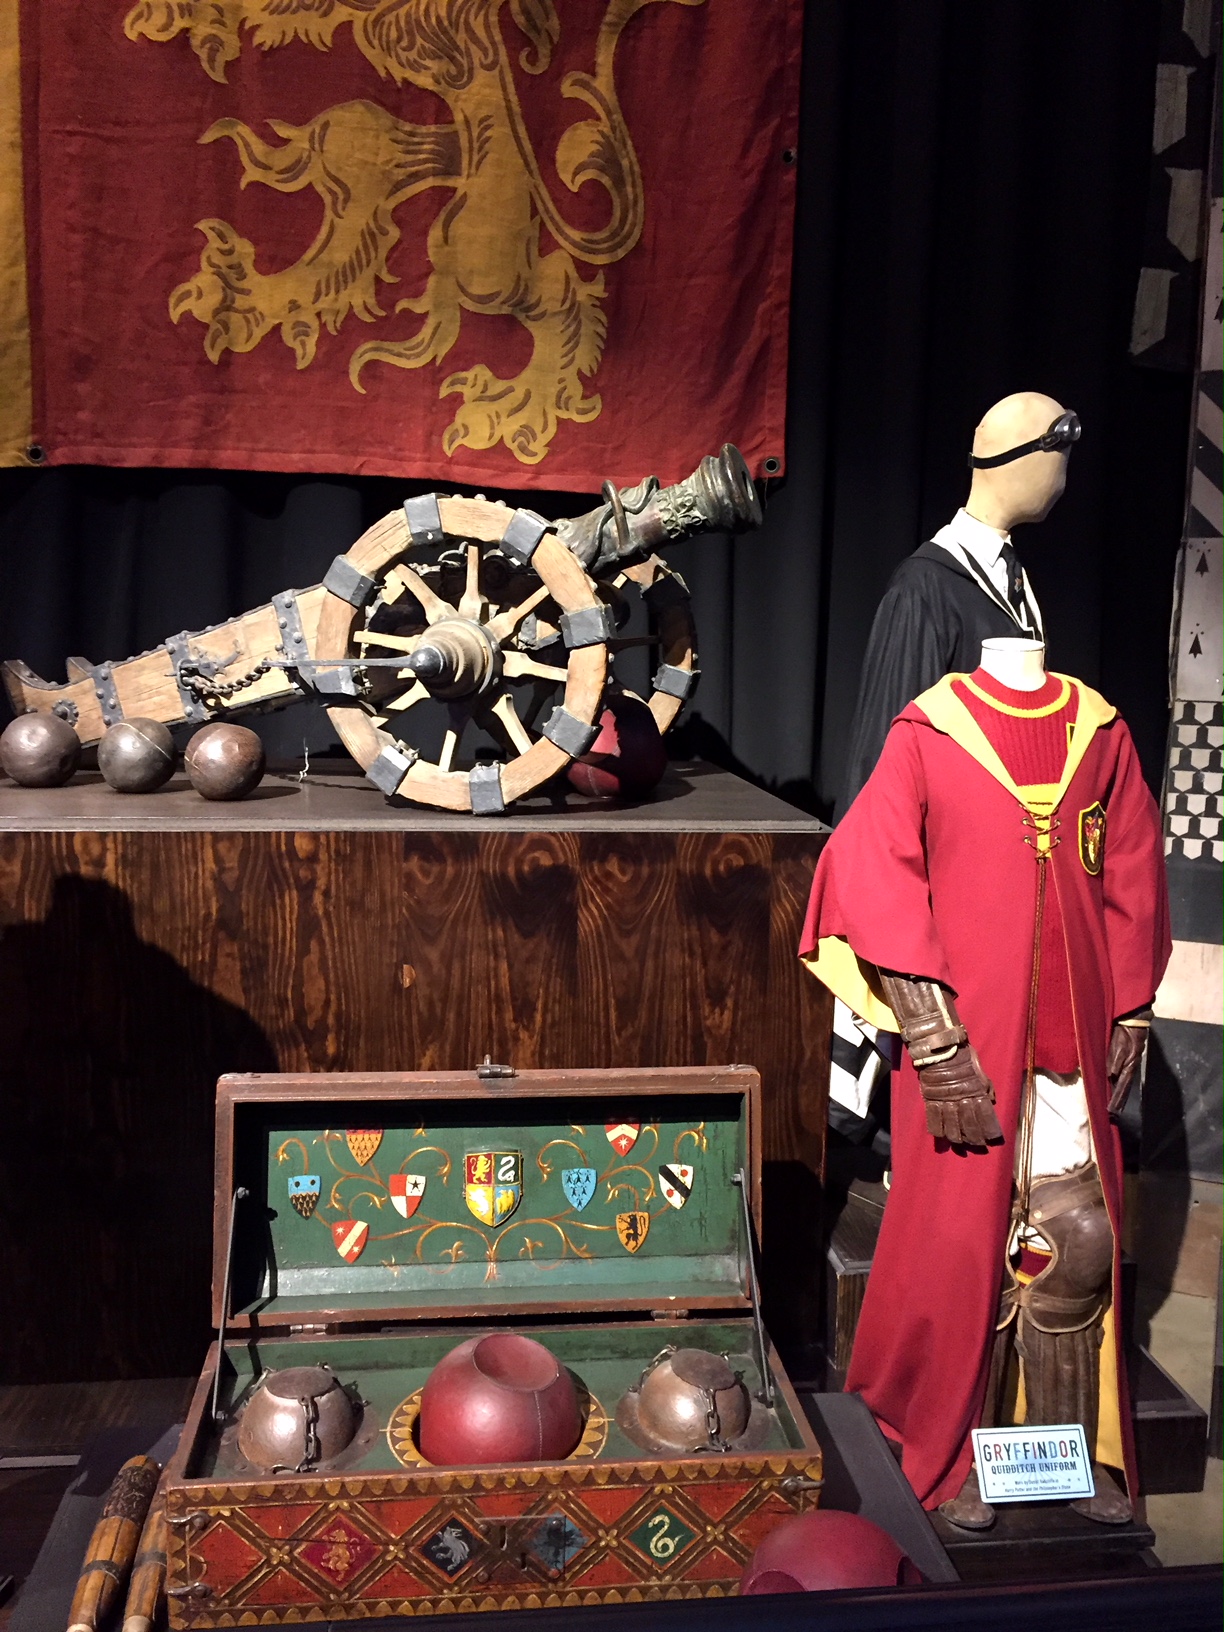 Quidditch costumes and props